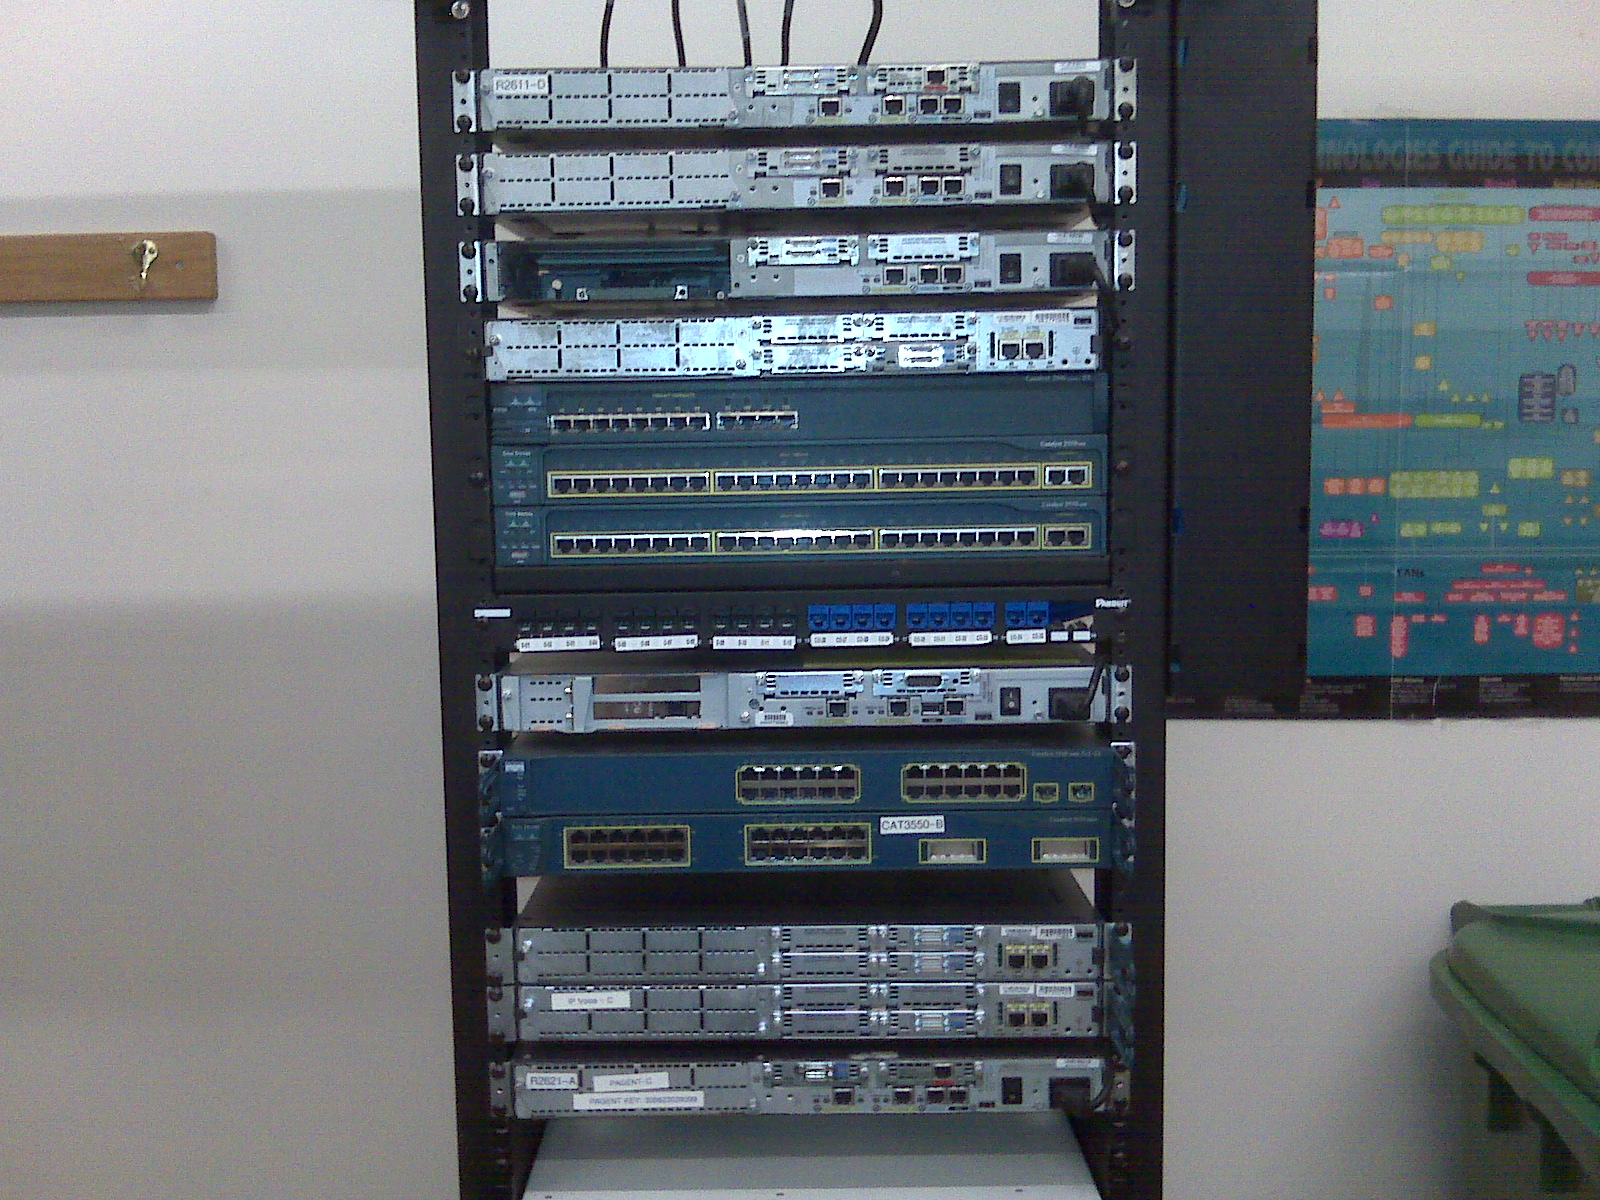 Cisco classroom network racks and hardware. There are various 2600/2800 routers, 2900/3500 series switches and PIX firewalls.